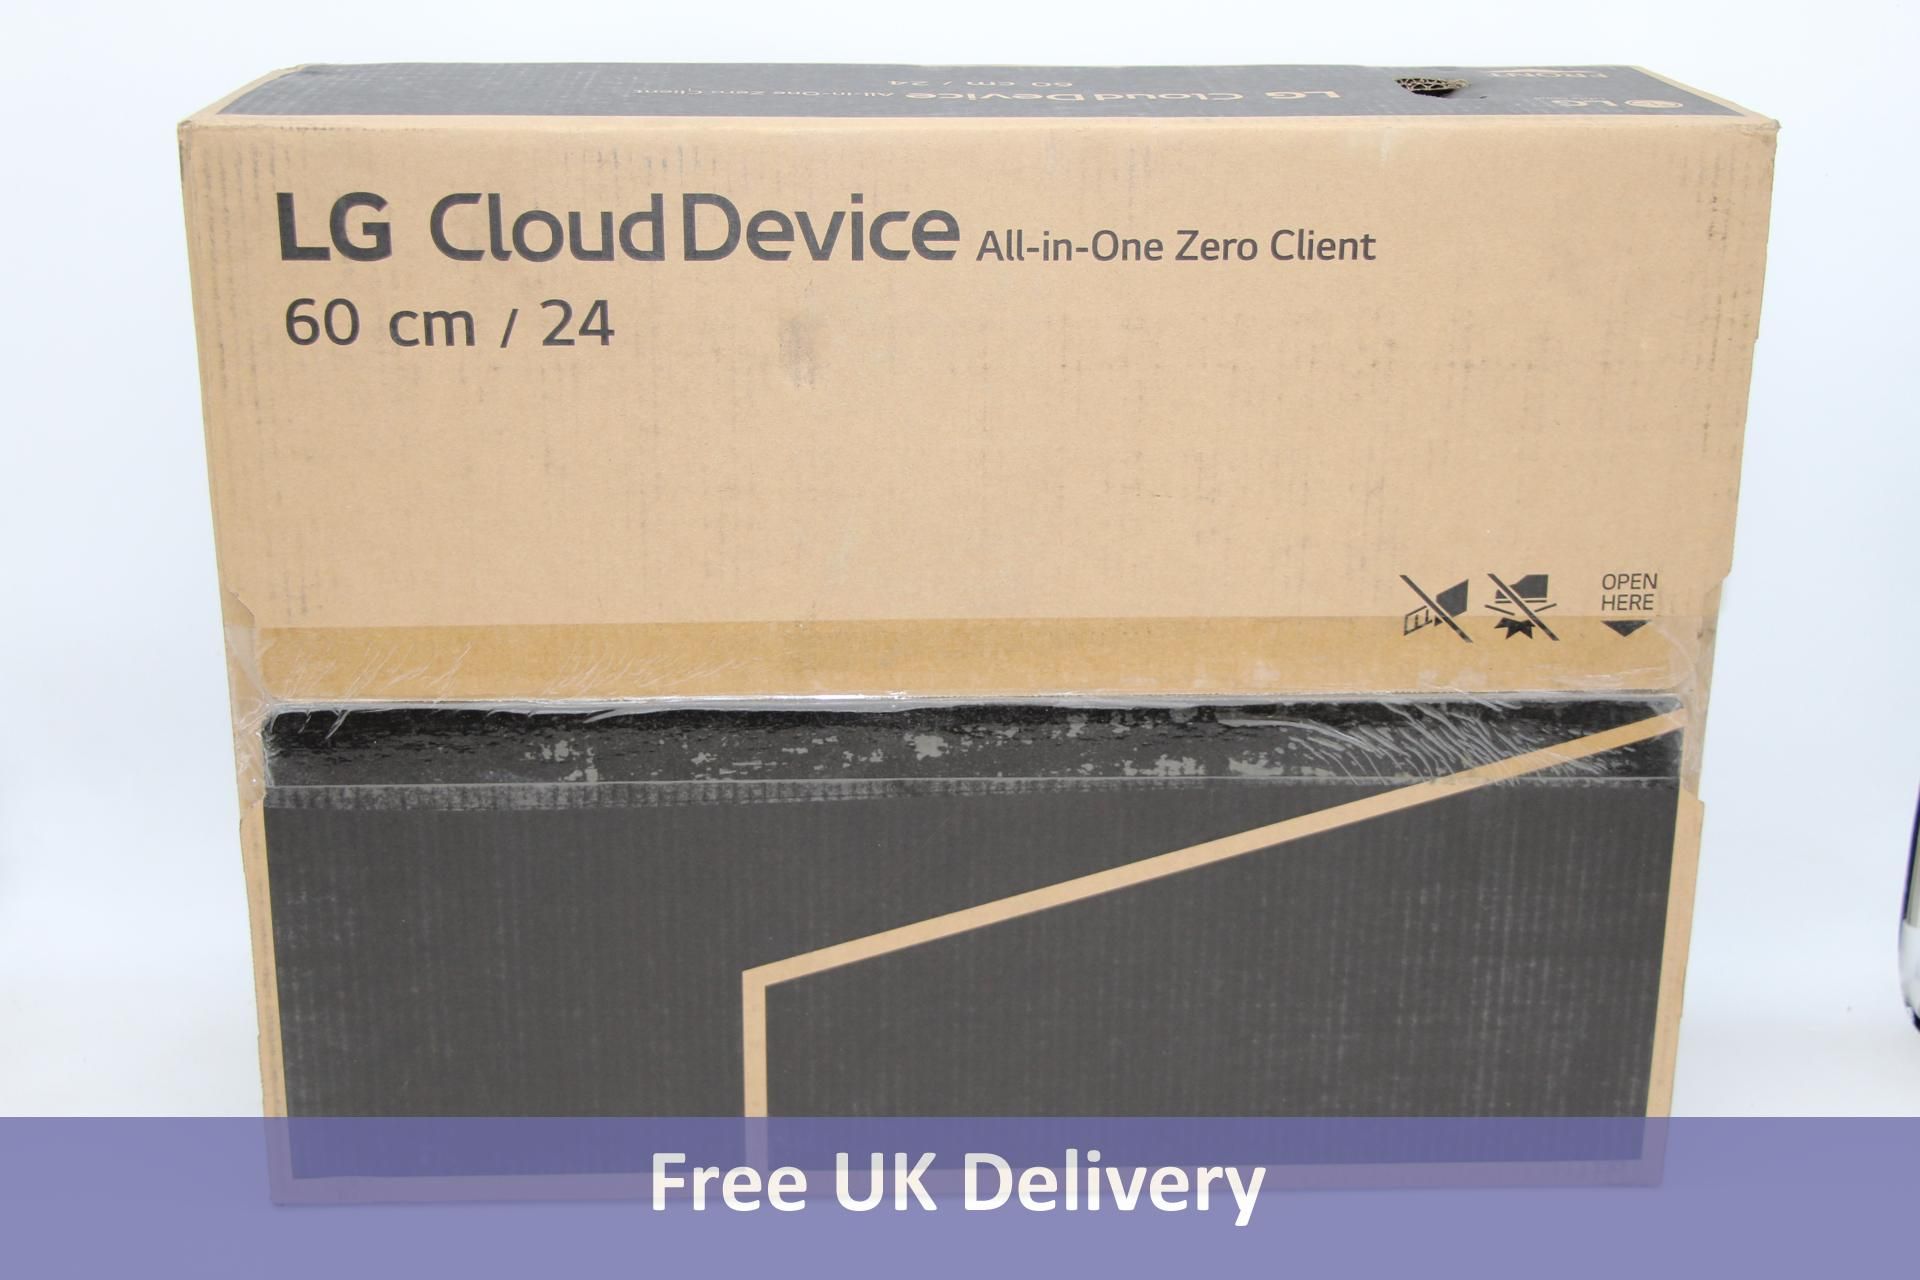 LG Cloud Device All-in-one Zero Client, 24"